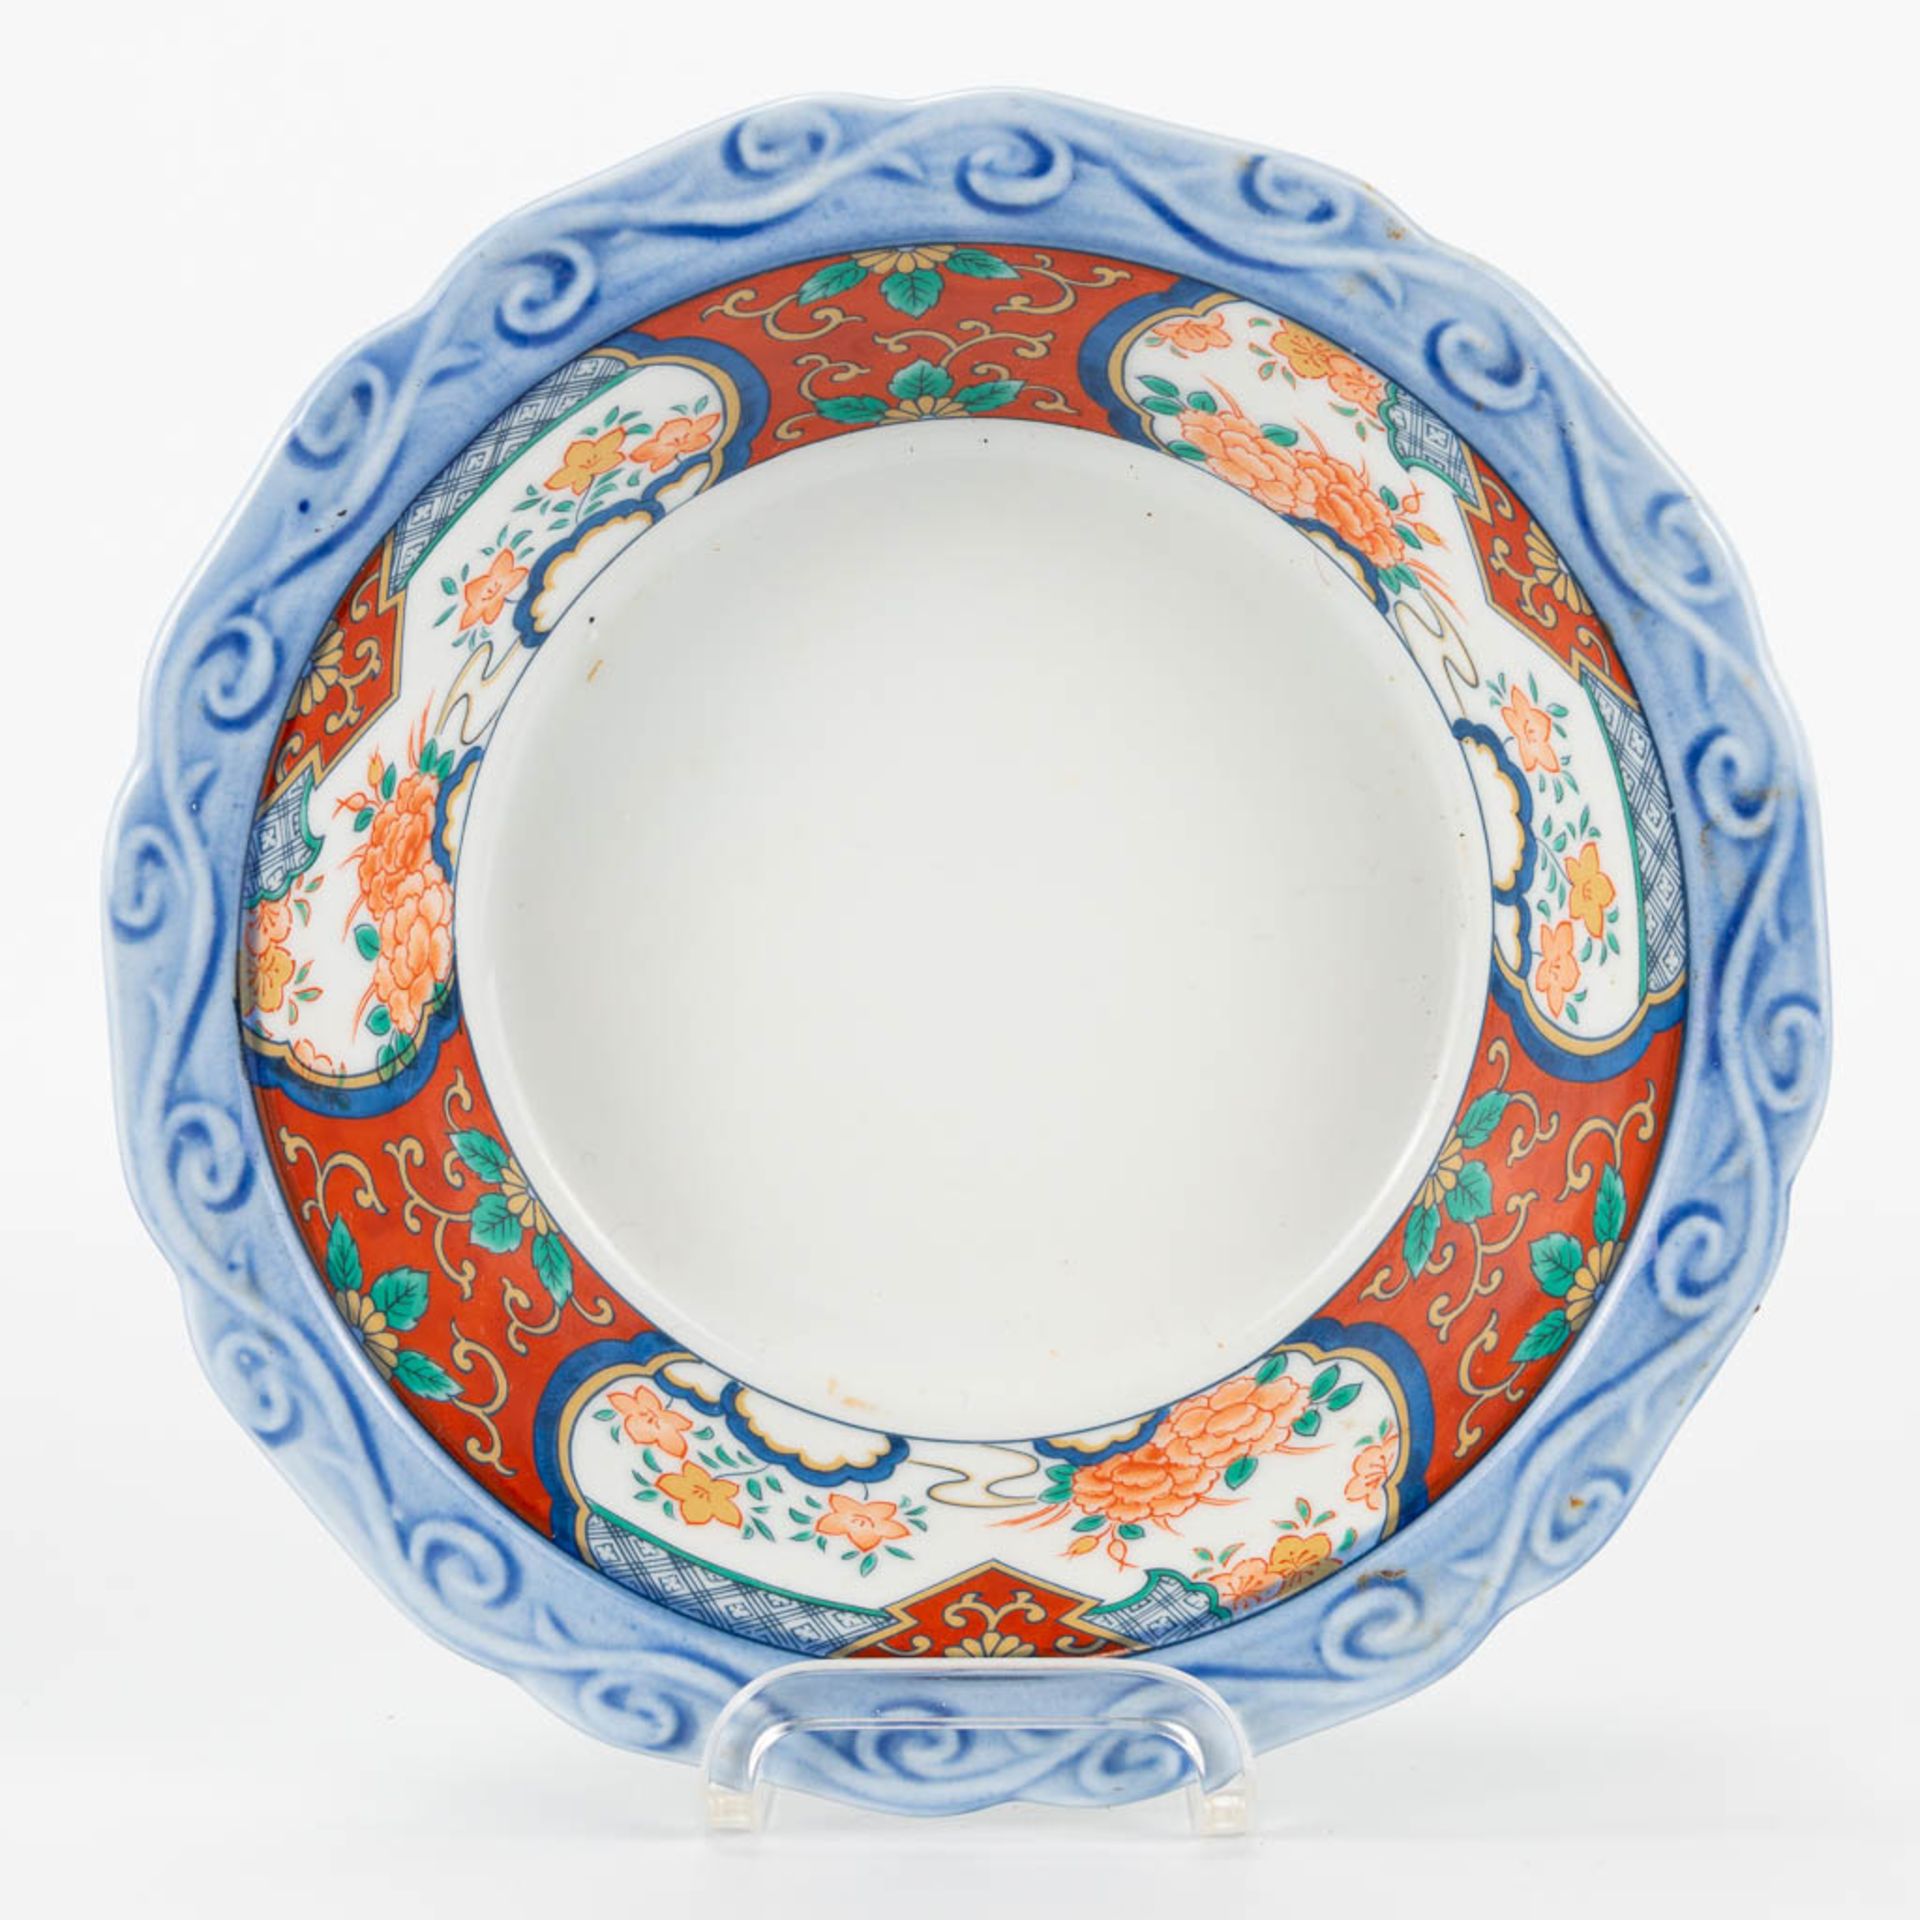 An assembled collection of 10 plates made of Japanese porcelain, Imari, blue white. (4 x 25 cm) - Image 7 of 16